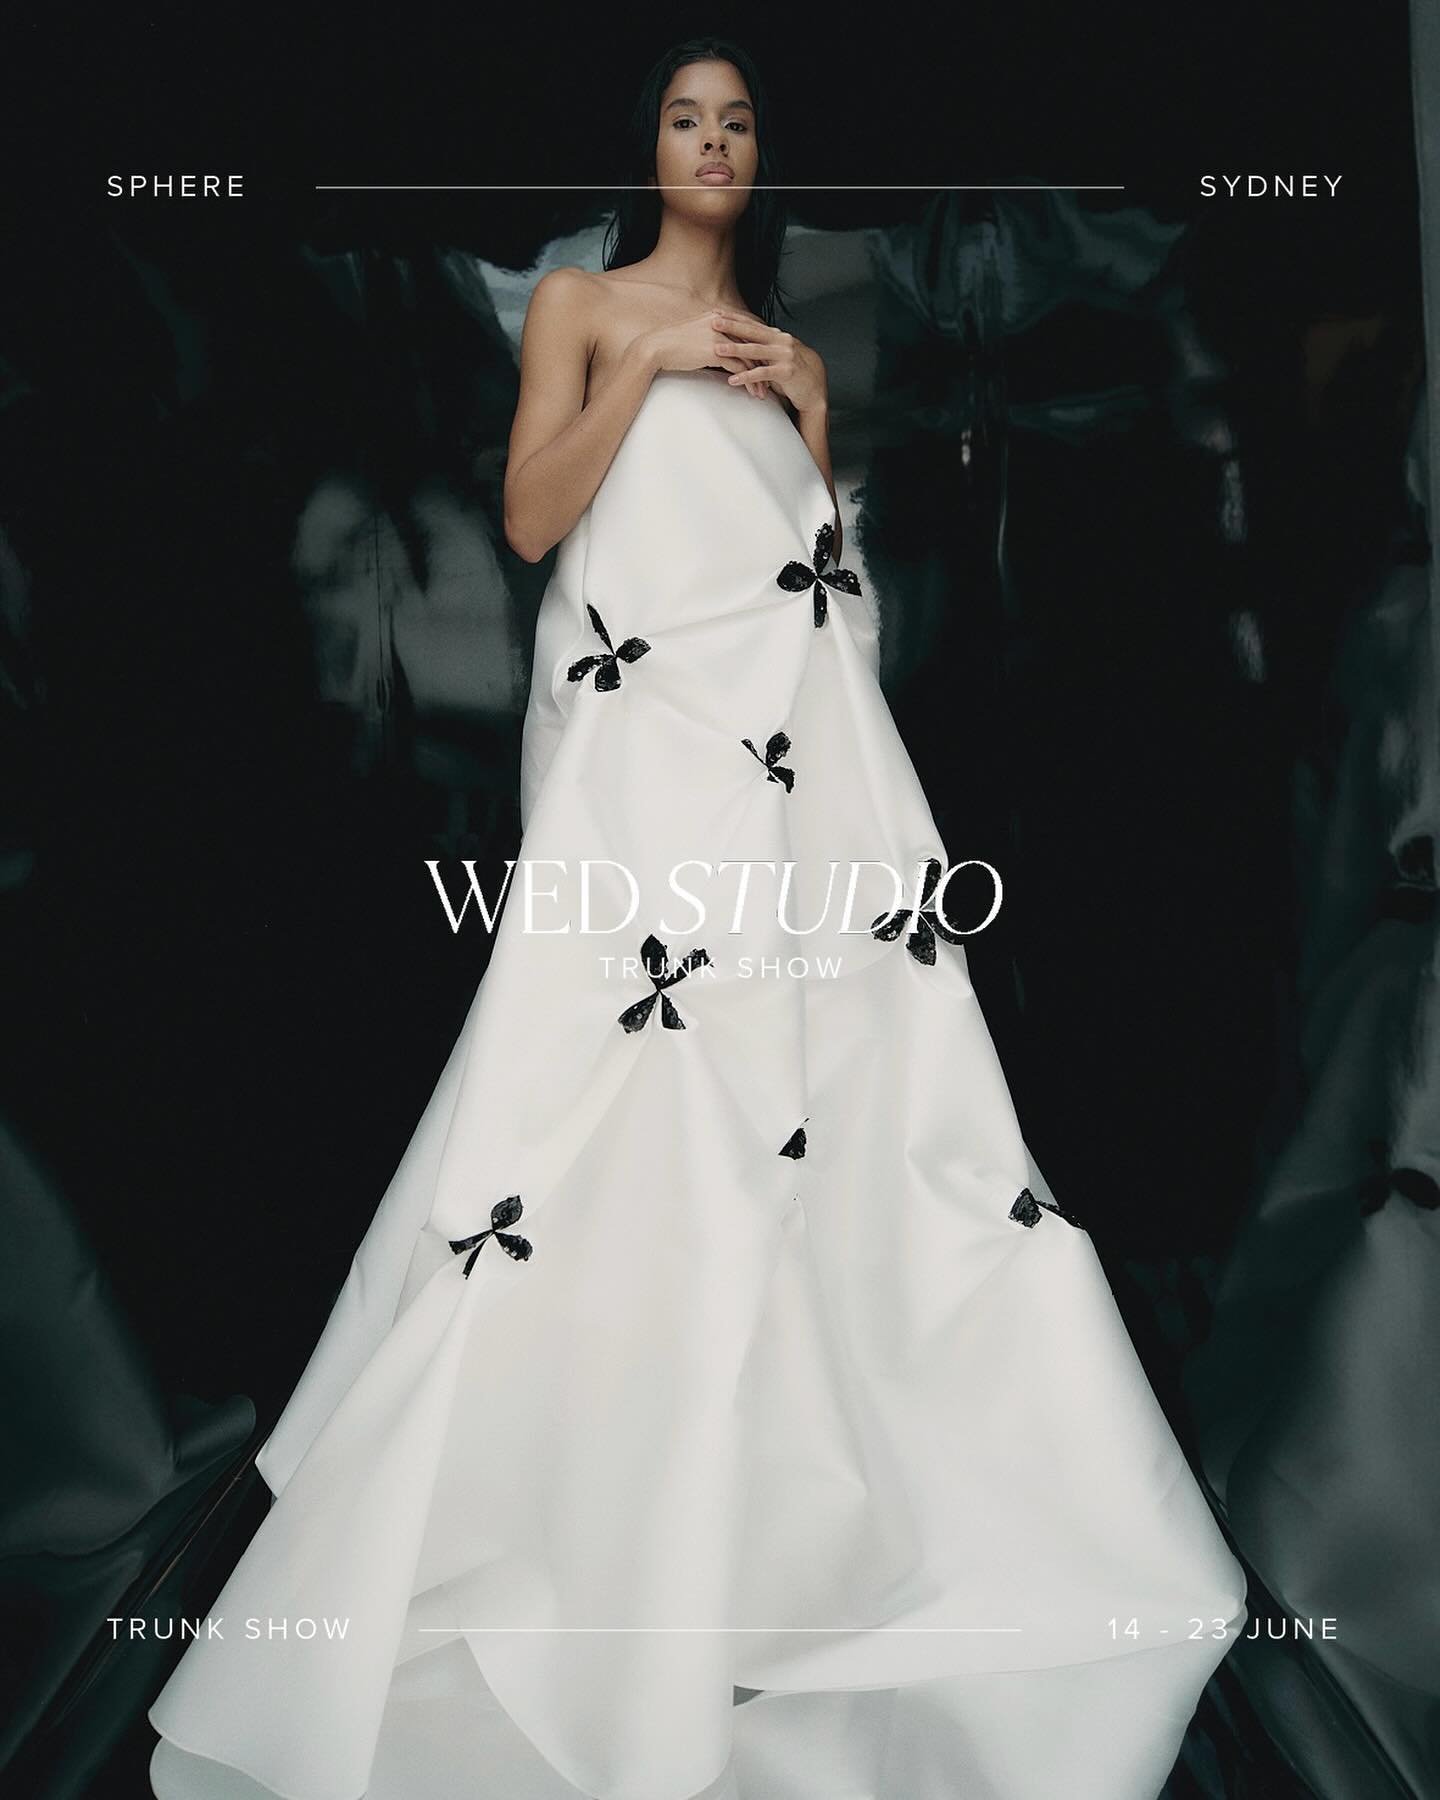 WED STUDIO TRUNK SHOW &mdash;&mdash; Making their Australian debut, UK designer @wedstudio_ at Sphere Bridal Gallery next month! Renowned for their chic, unconventional design approach and redefining the bridal landscape, this is one not to be missed